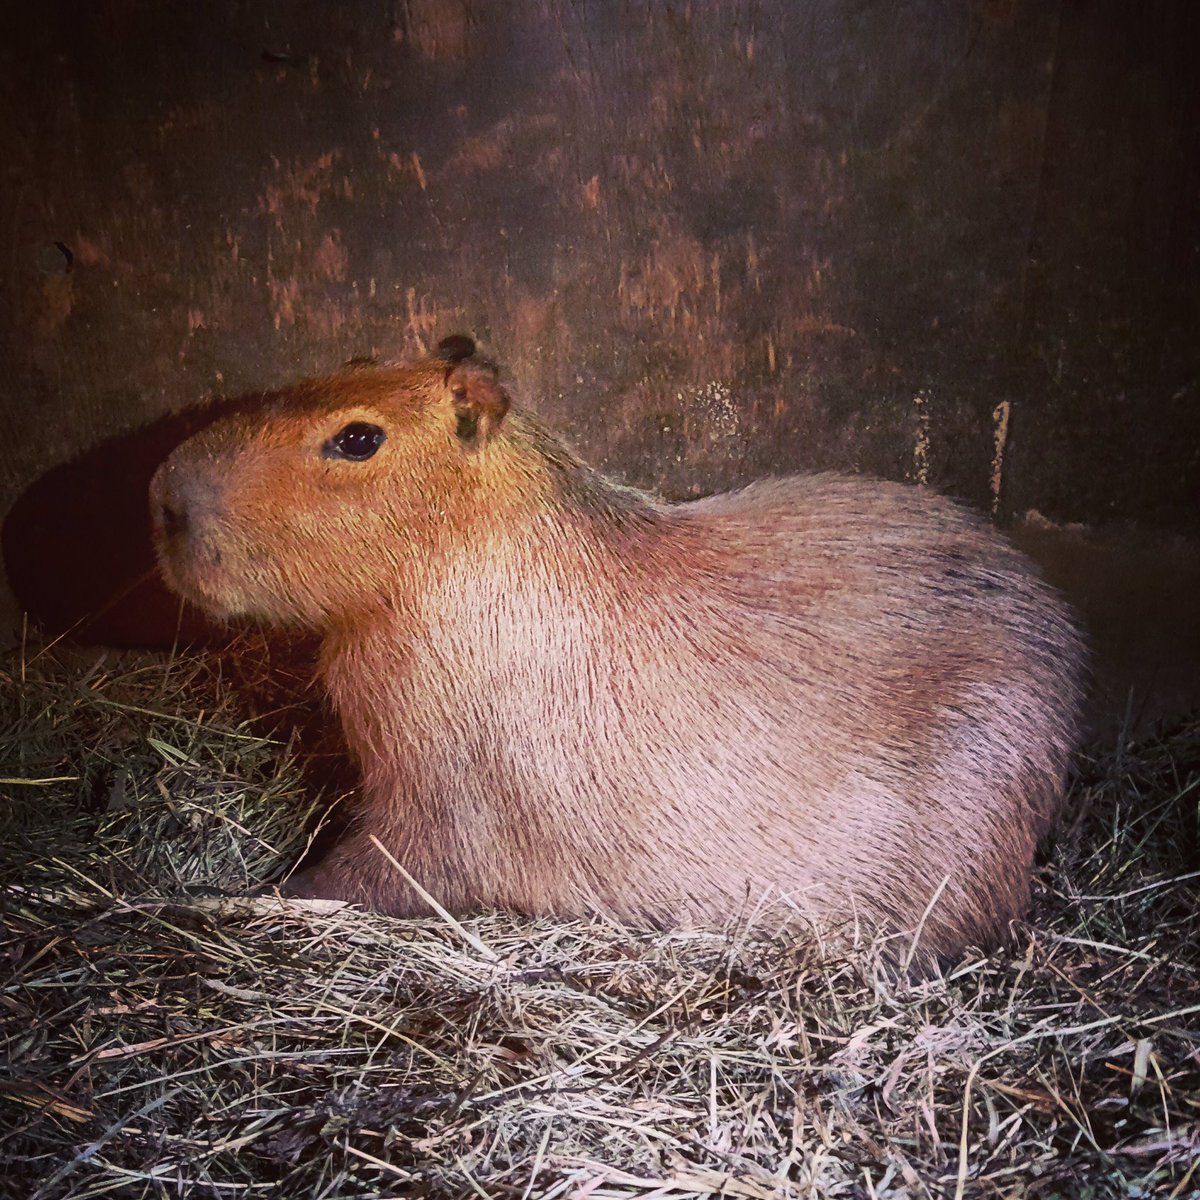 Officials say the second capybara who went missing from the High Park Zoo has been found. 